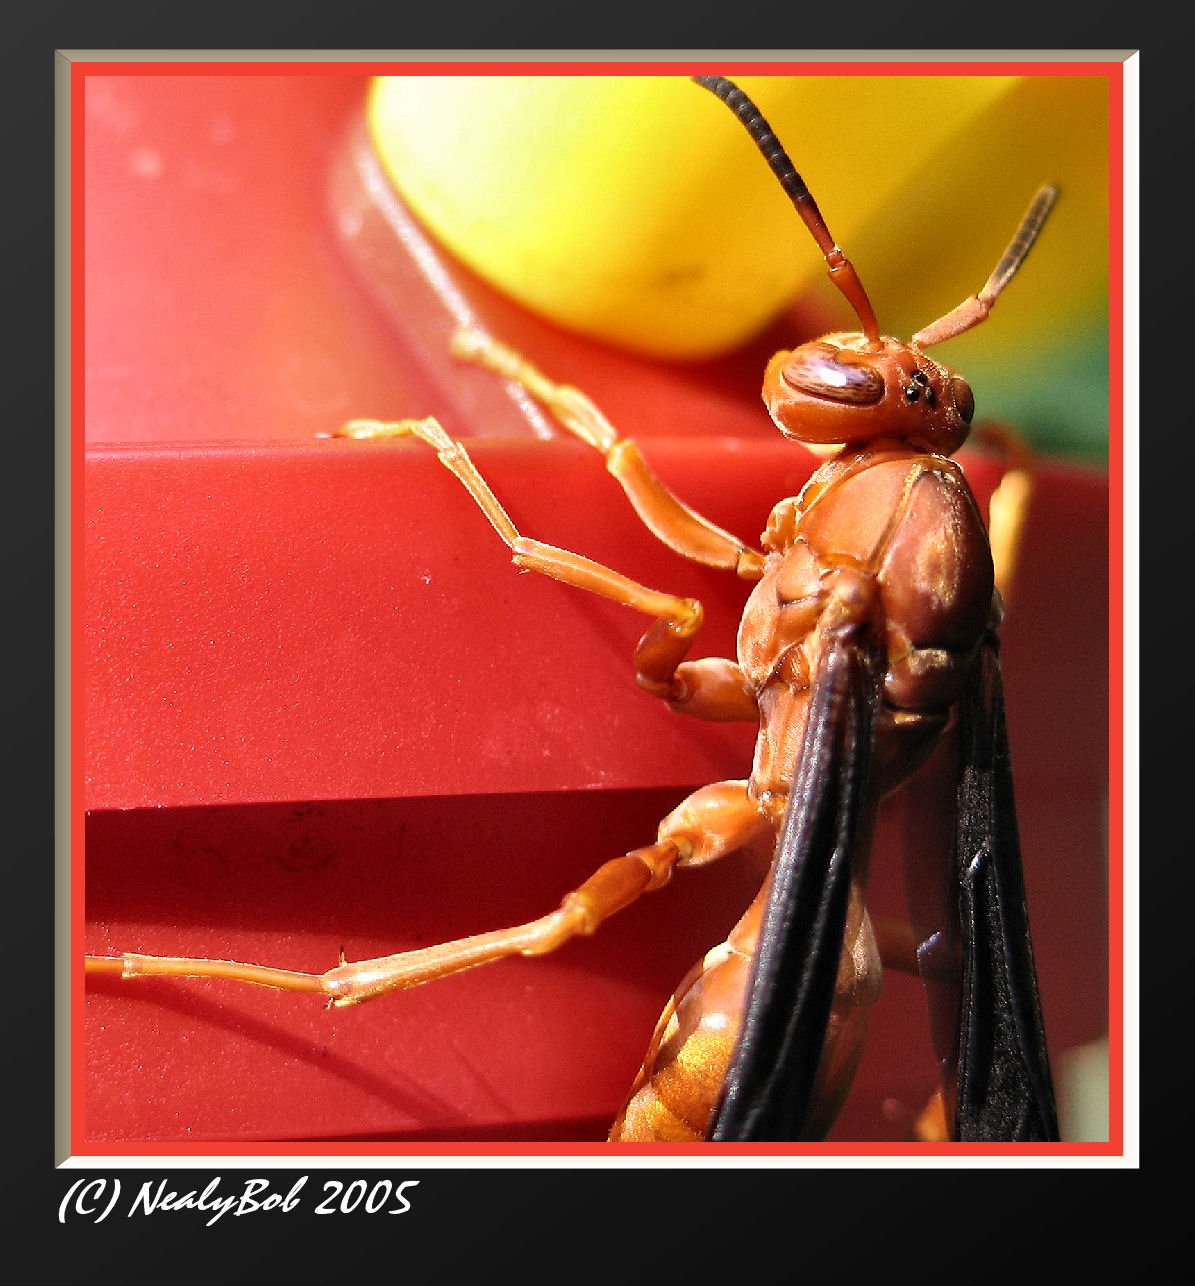 Red Wasp *